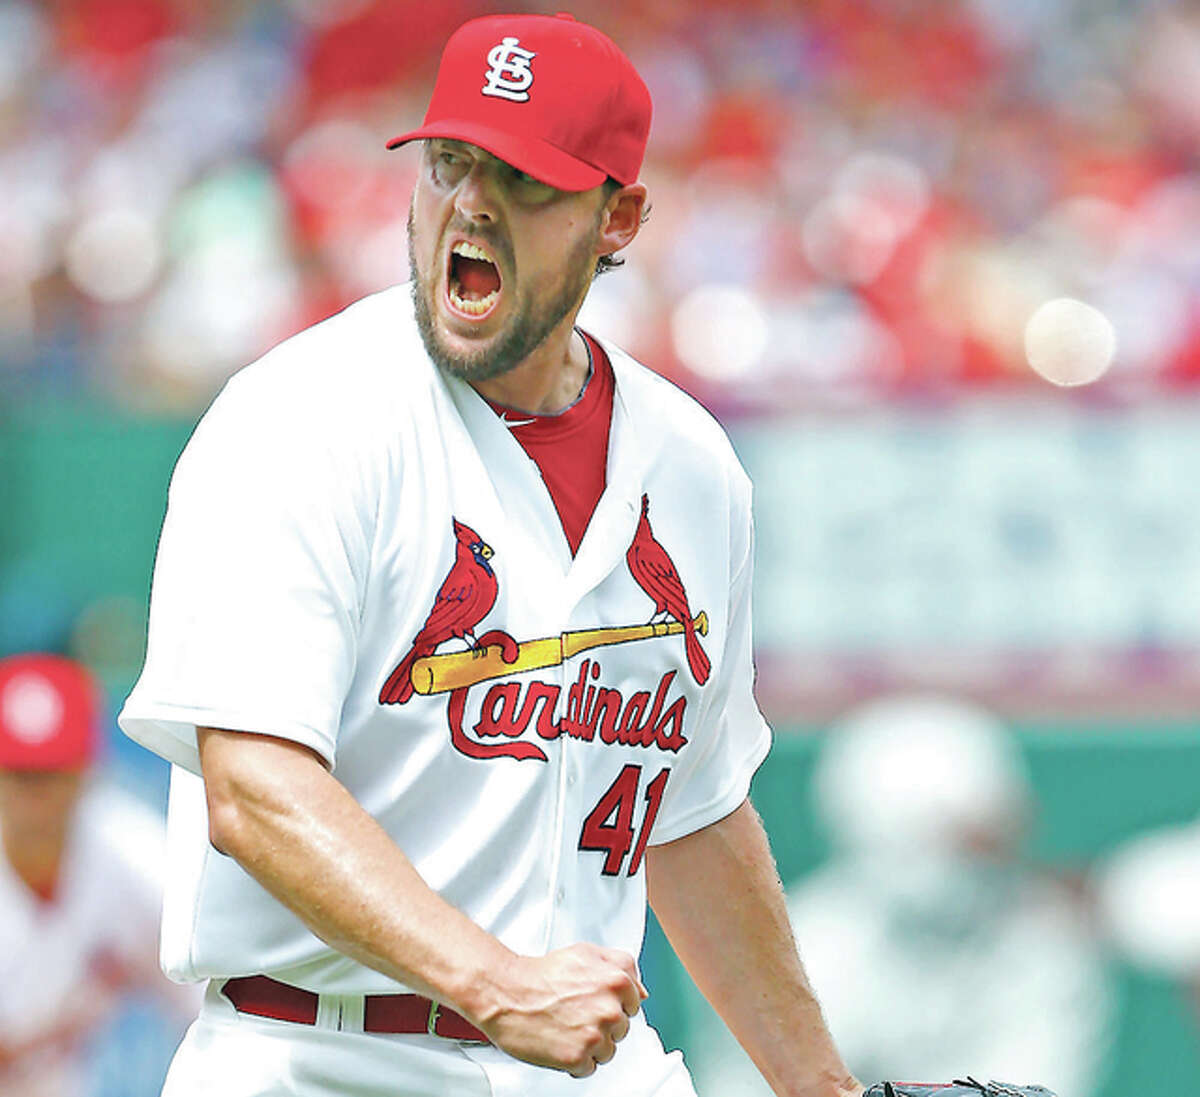 Former Cardinals starting pitcher John Lackey reacts after striking out Chicago Cubs’ Anthony Rizzo in a game last season at Busch Stadium. Lackey signed a free-agent contract with the Cubs Friday.